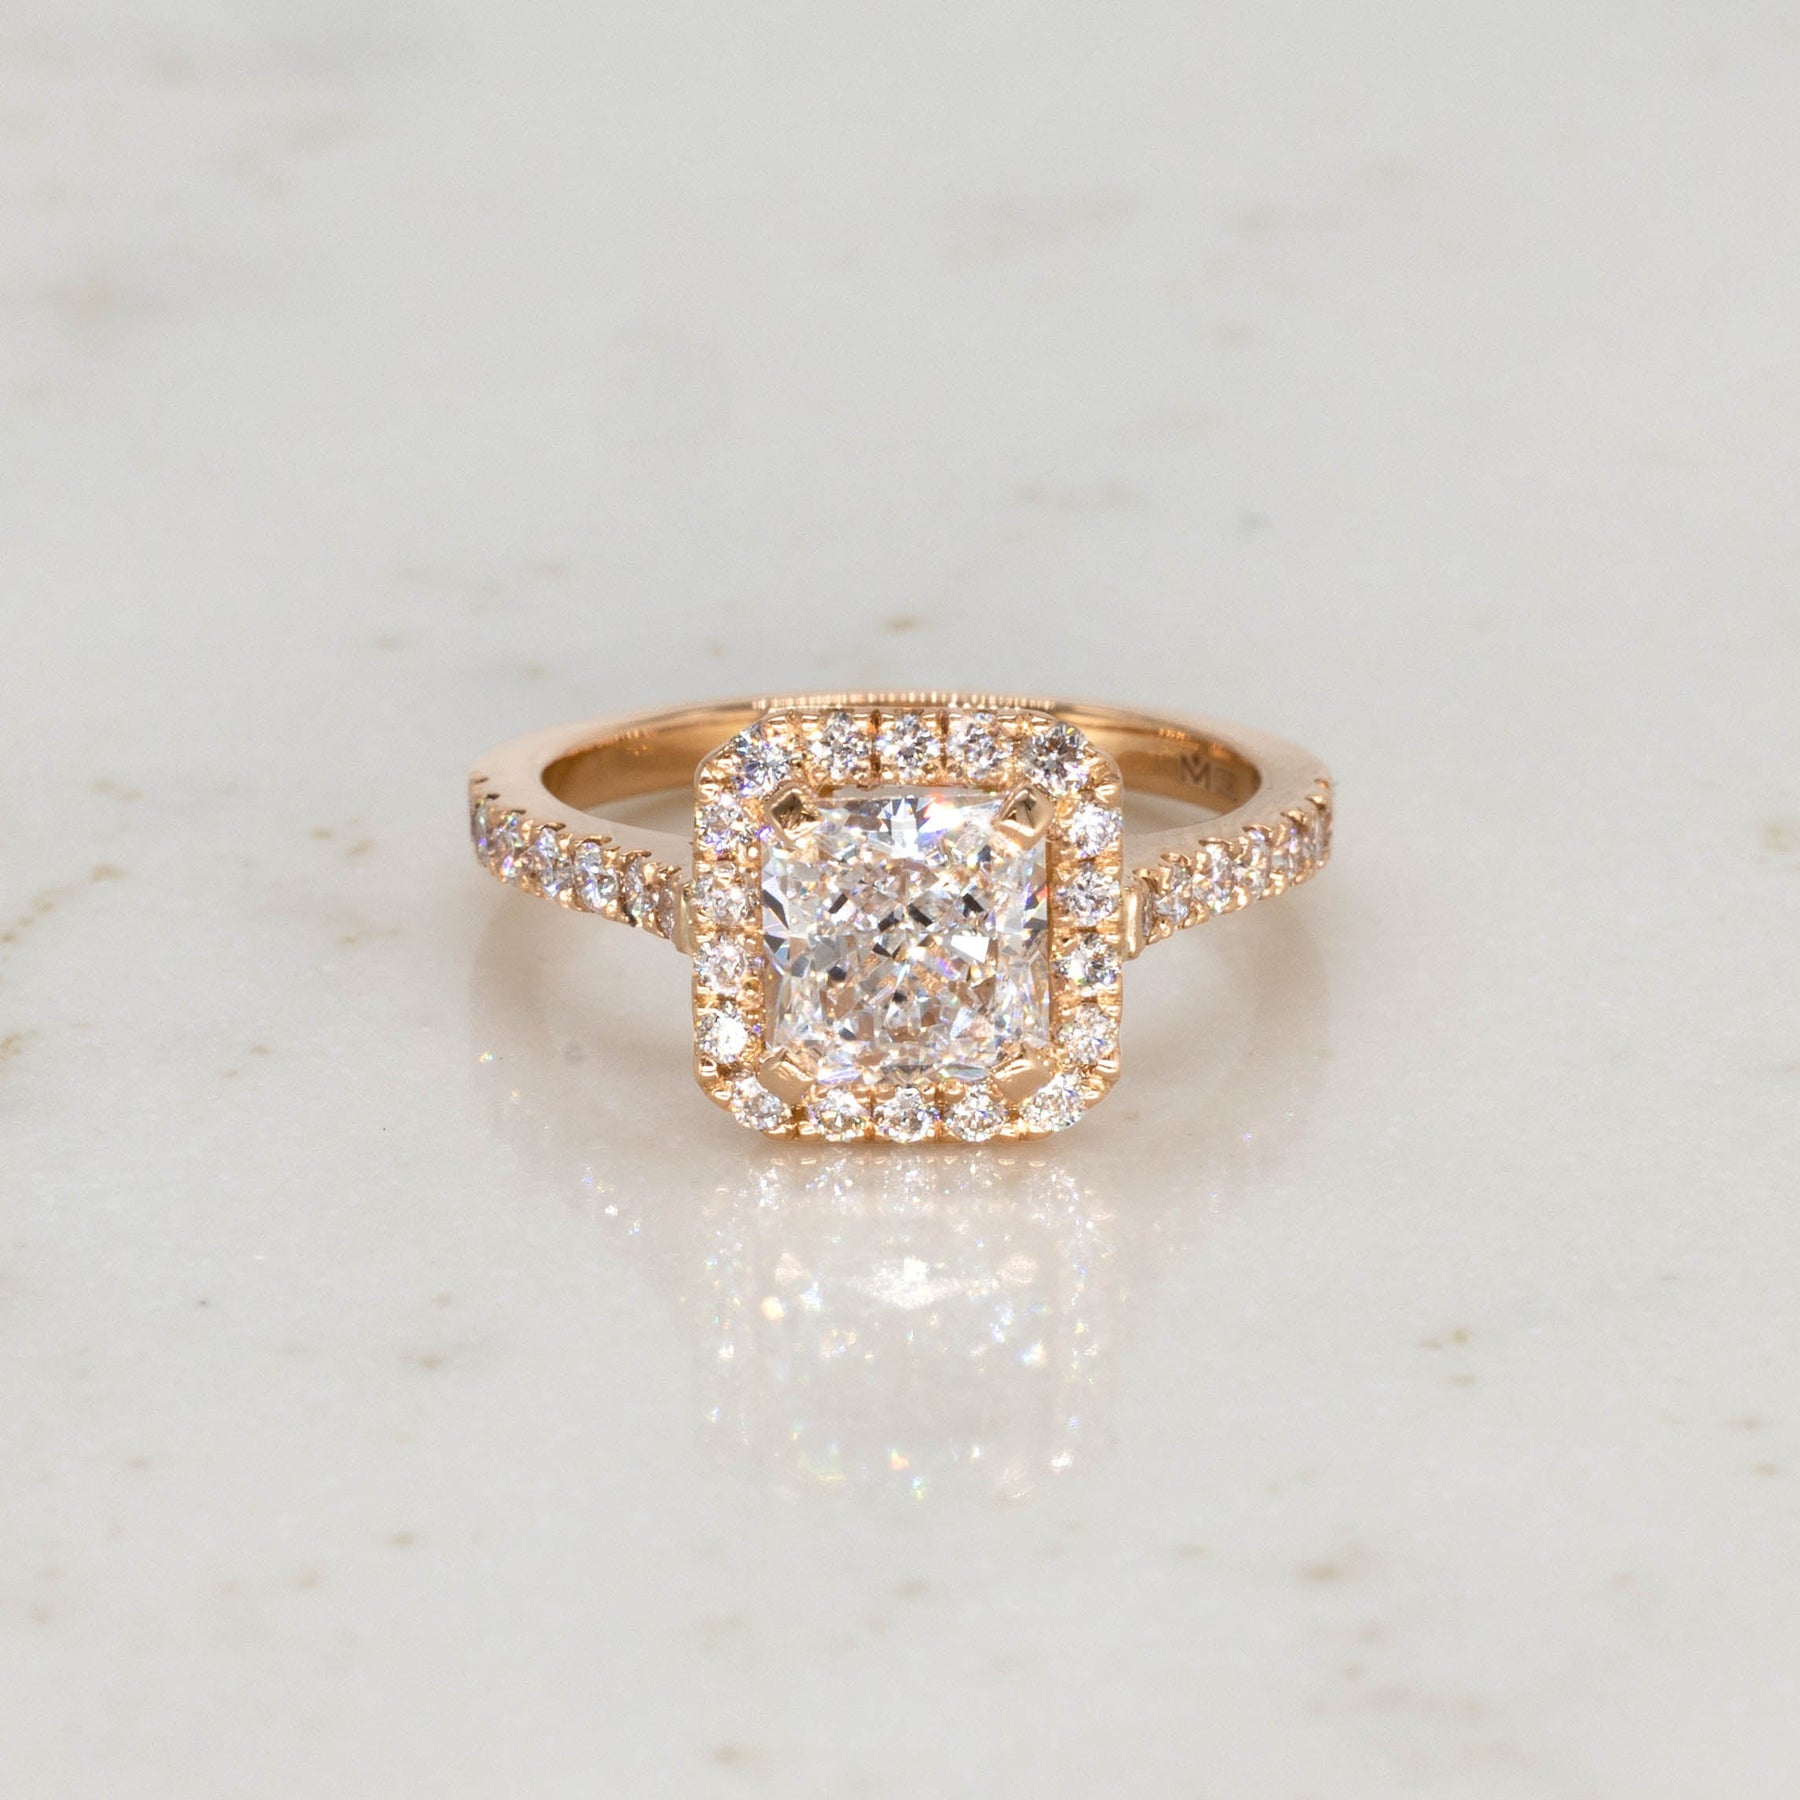 Radiant Cut Diamond Engagement Ring is a modern take on a classic Halo Design. Handmade in Auckland